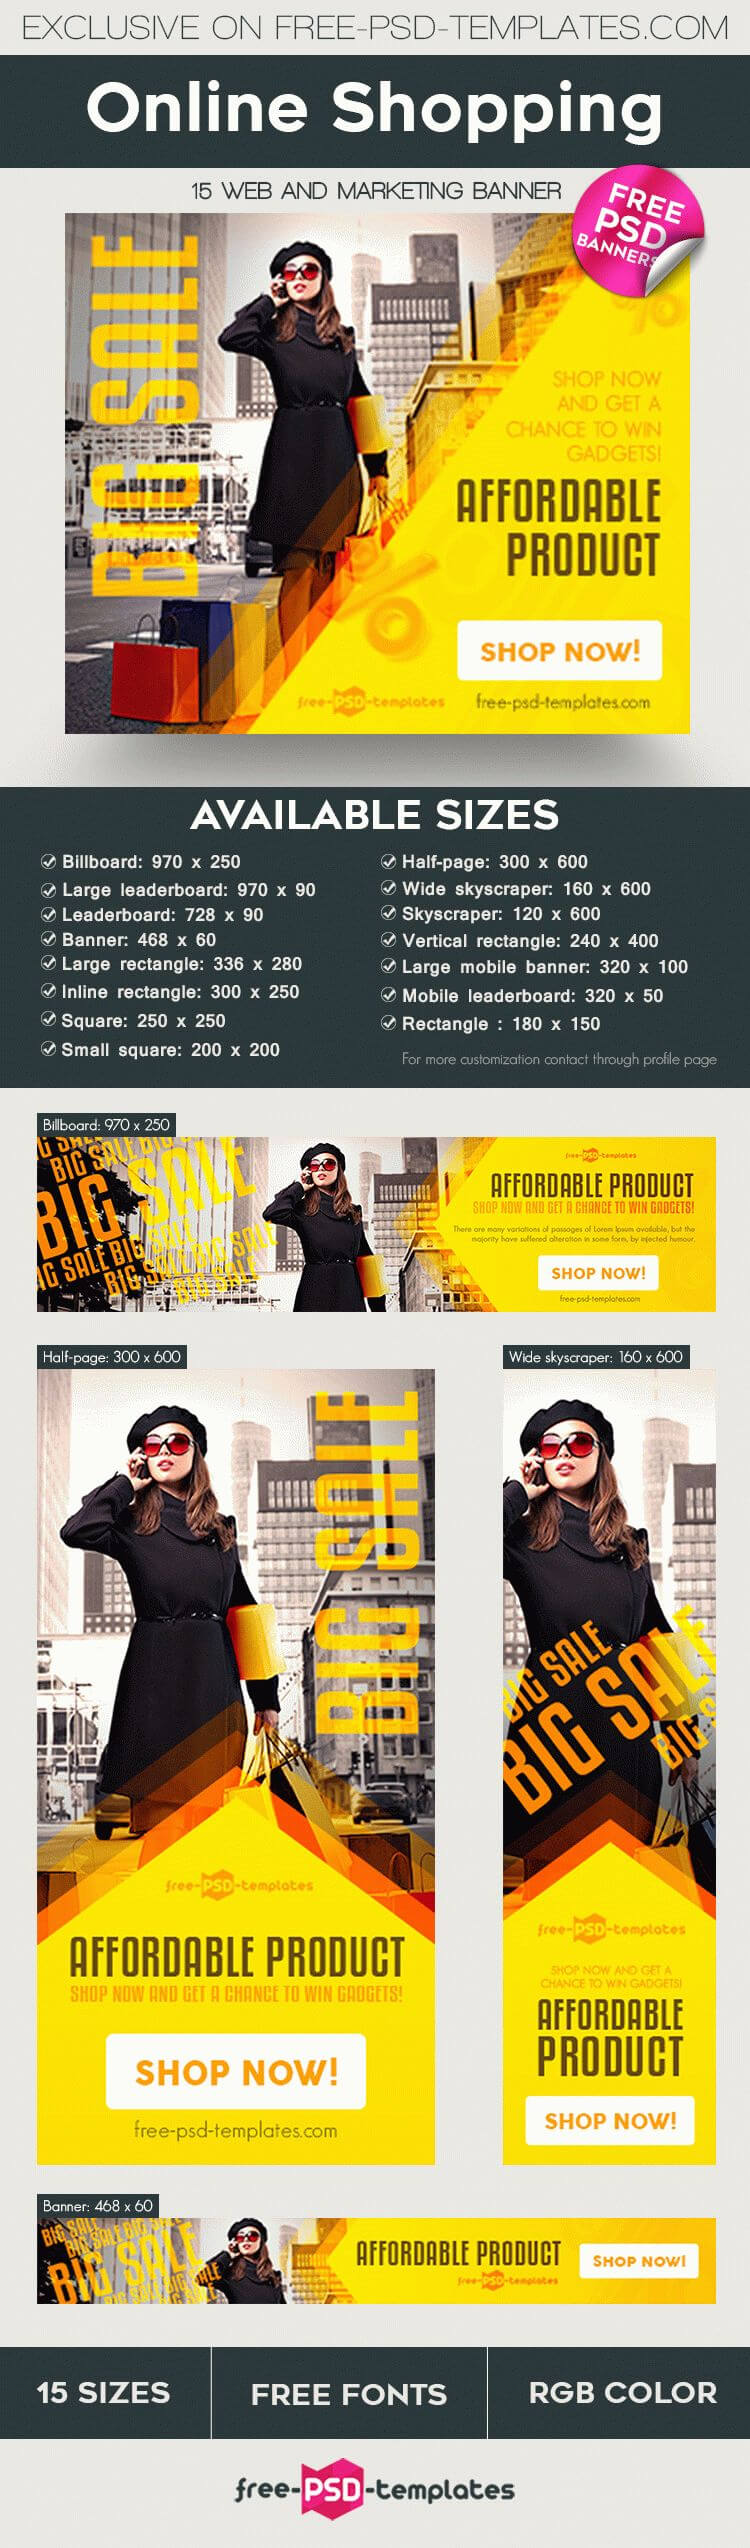 15 Free Online Shopping Banner In Psd | Free Psd Templates With Free Online Banner Templates